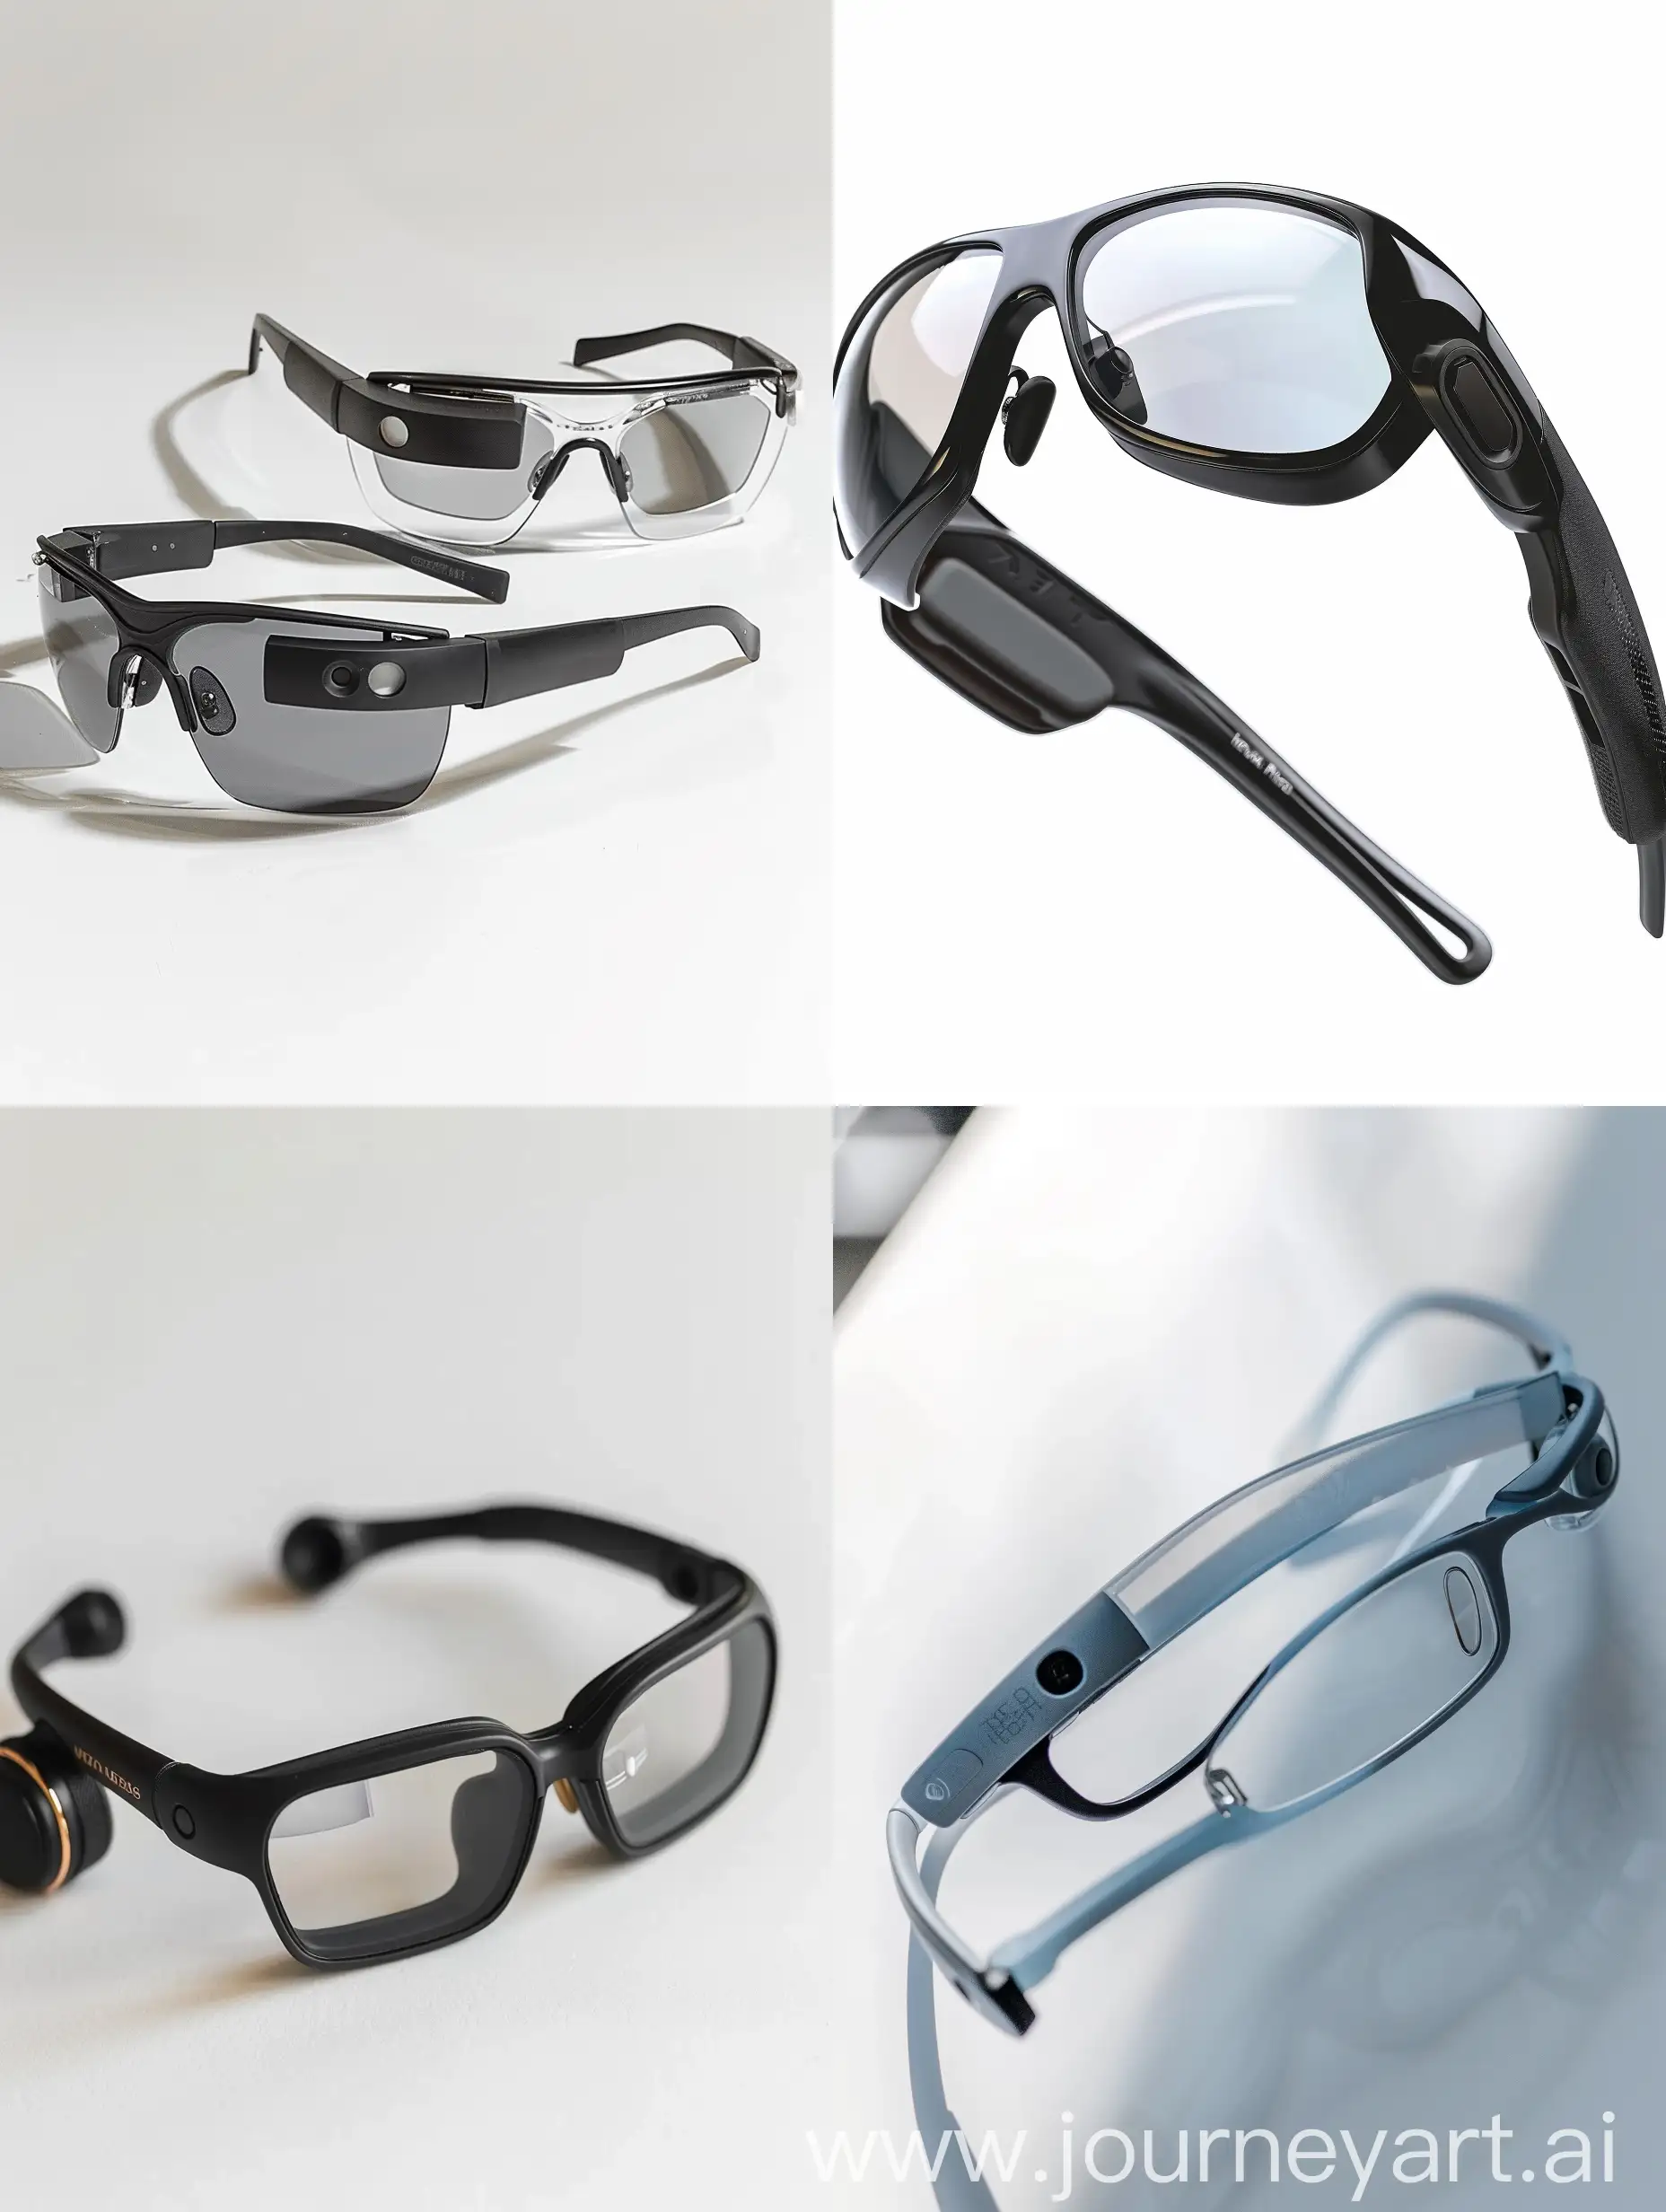 HandsFree-Glasses-Technology-with-a-34-Aspect-Ratio